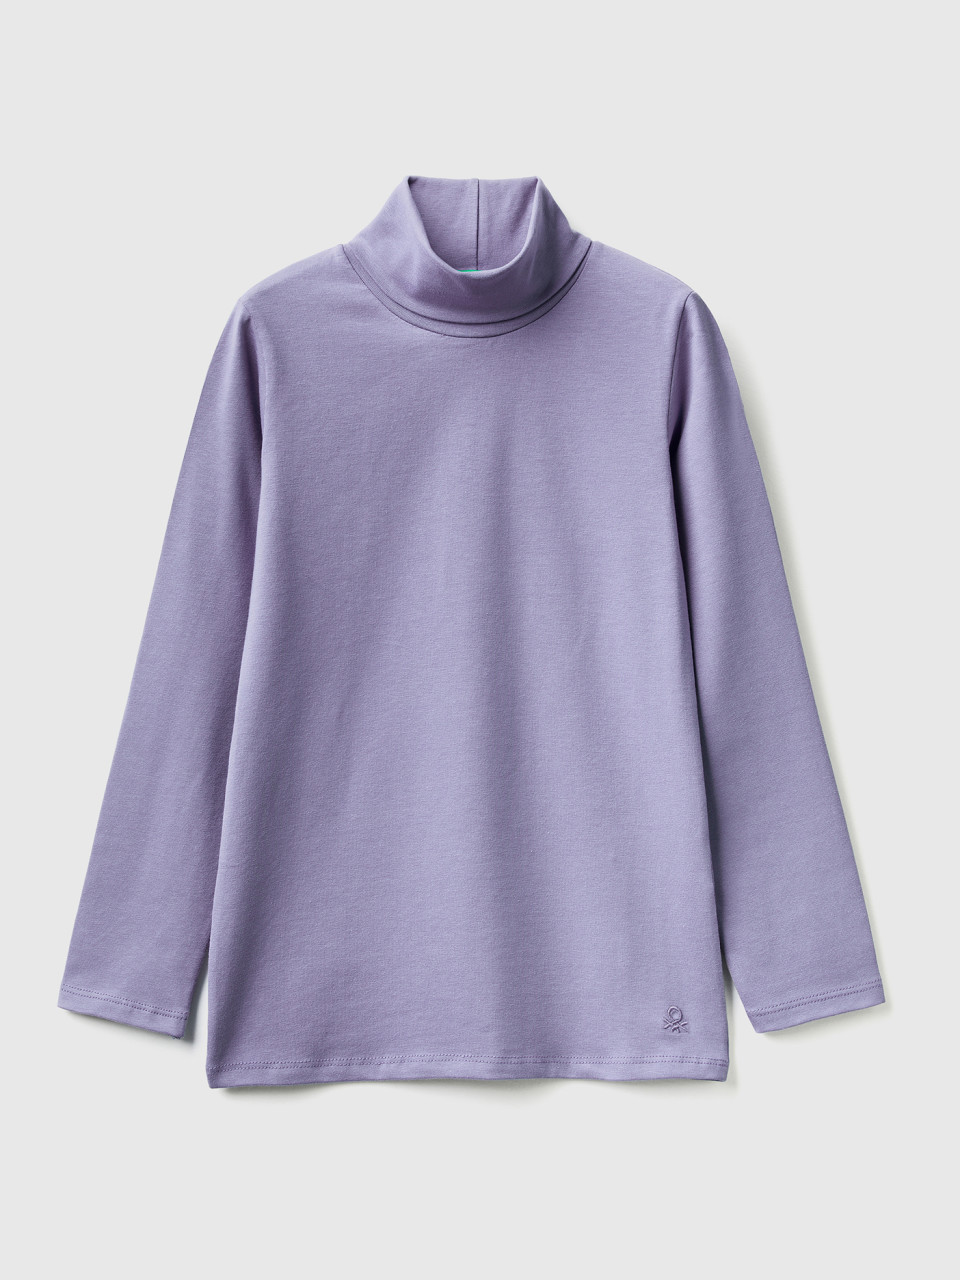 Benetton, Stretch T-shirt With High Neck, Lilac, Kids